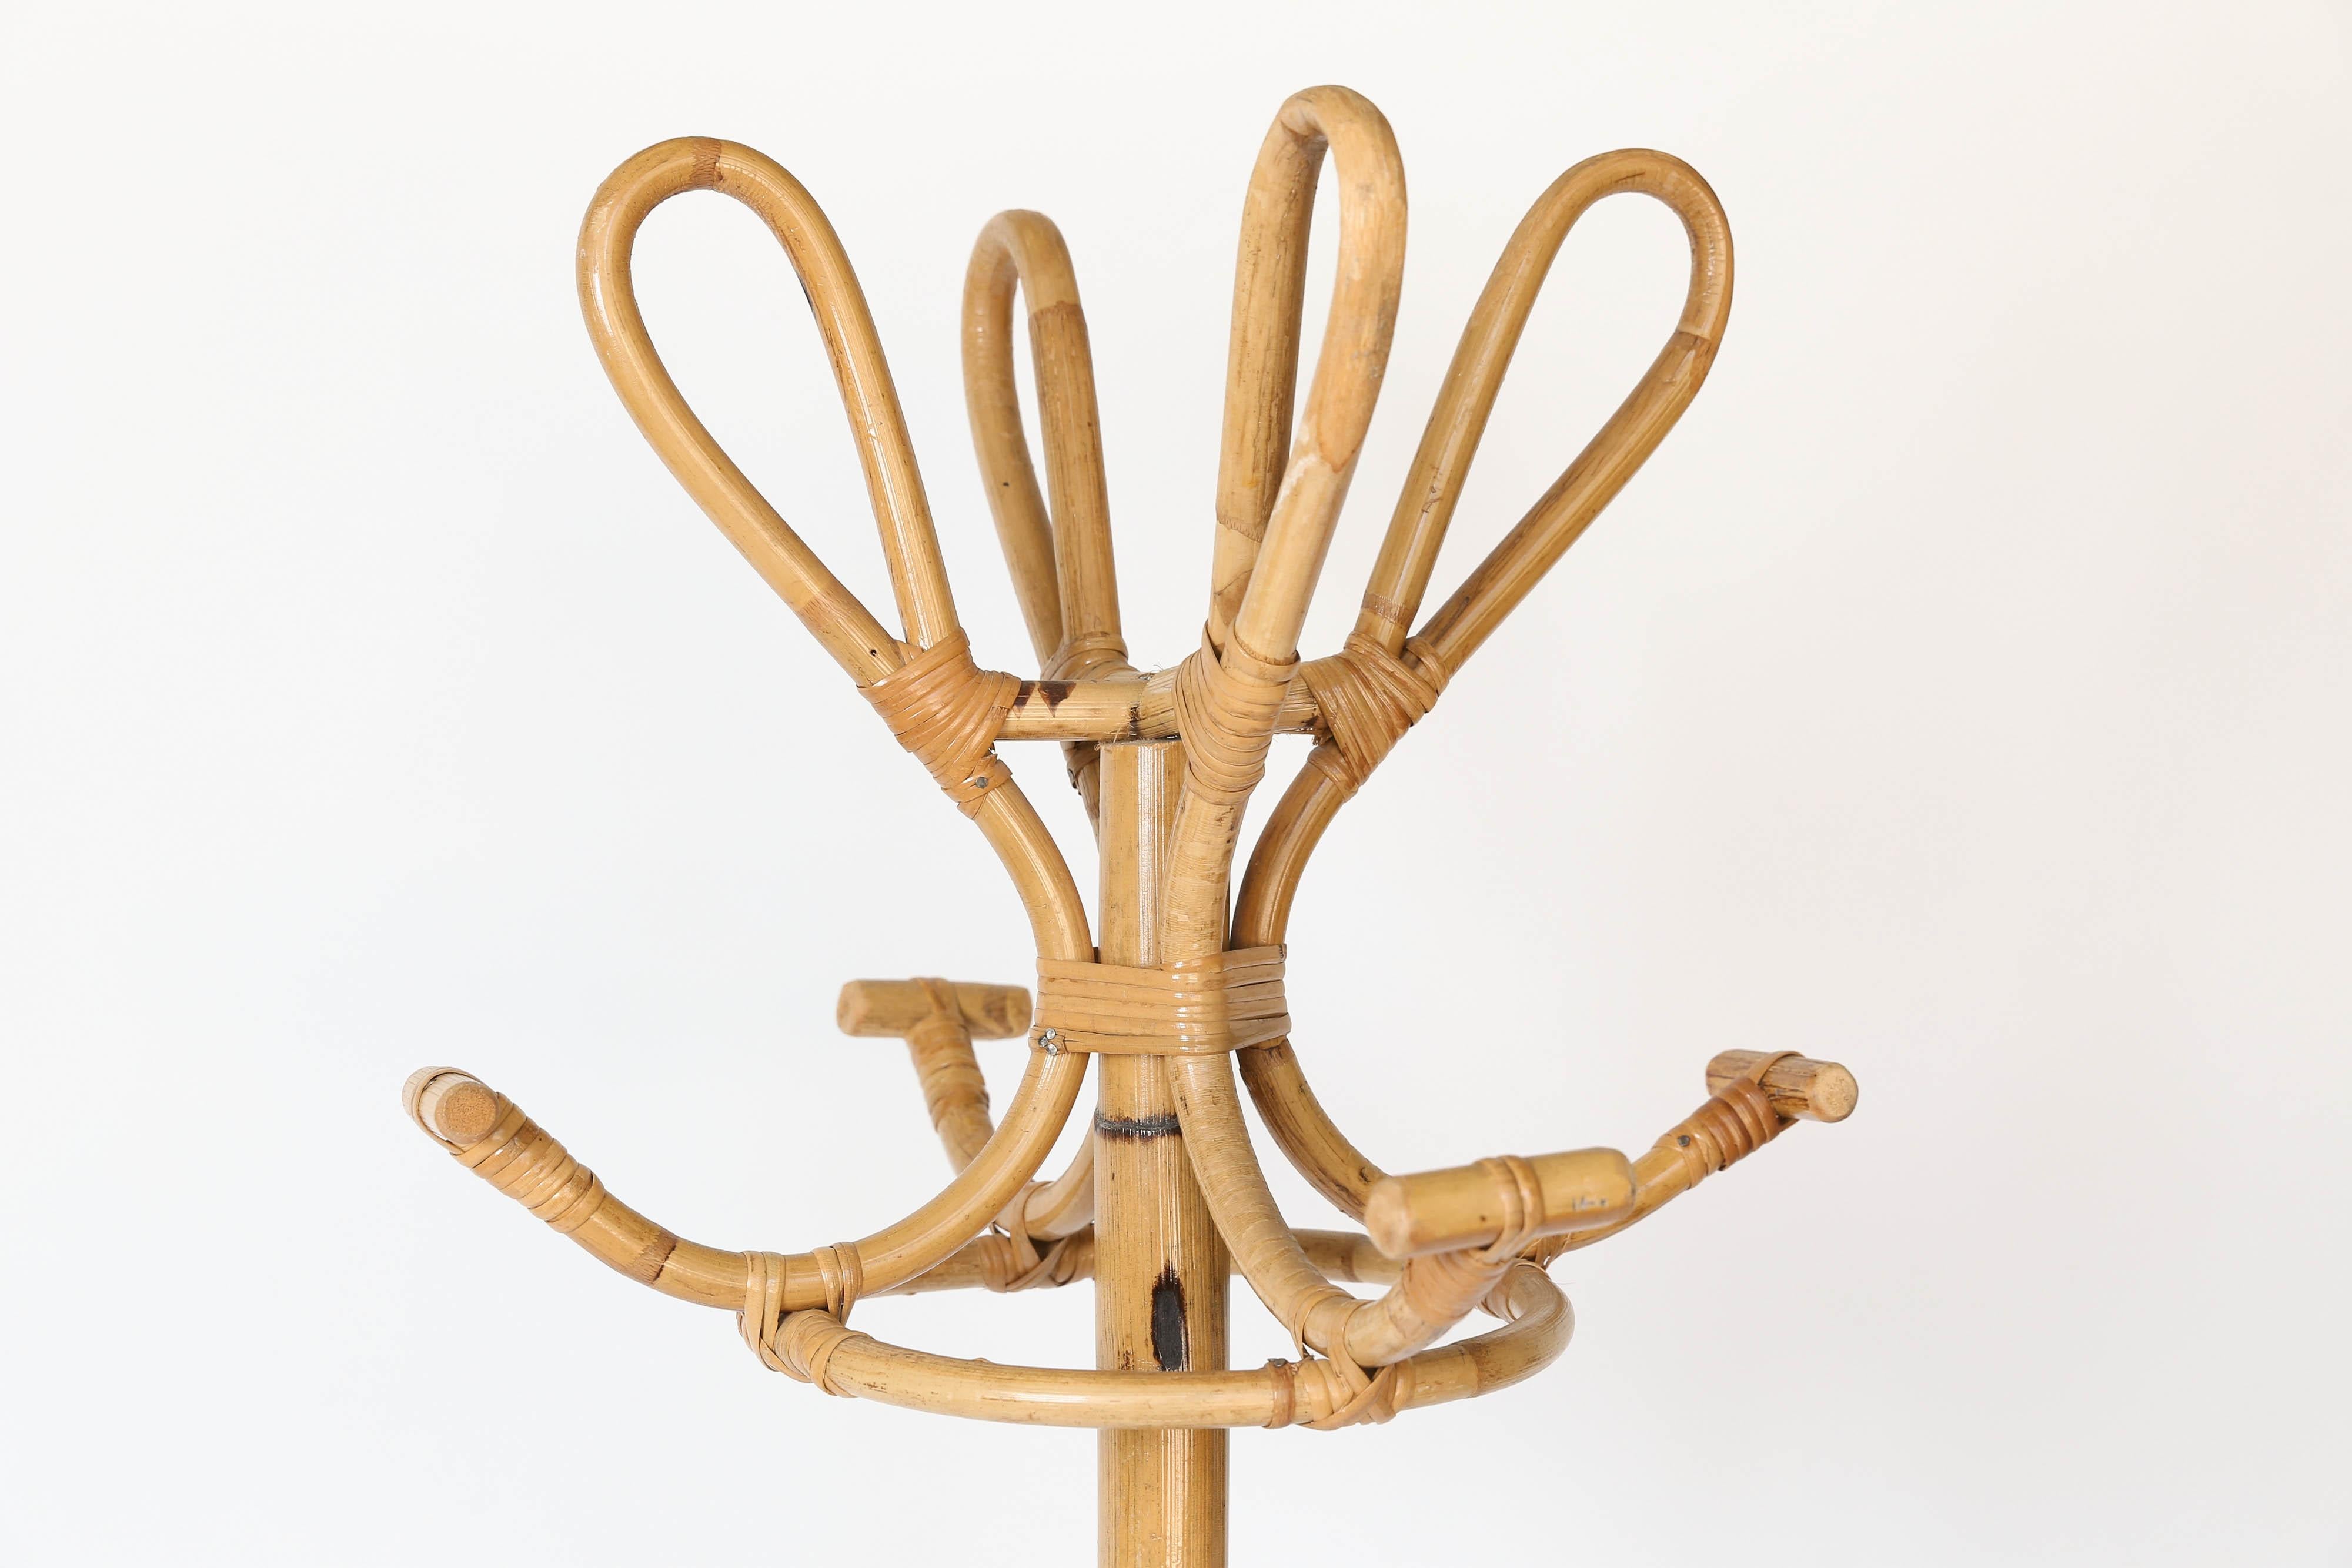 Midcentury coat and hat stand made of rattan. A decorative item as well as useful. With four hooks to hang hats and four hooks for coats, the piece stands on the floor with four legs and a decorative ring around the base.